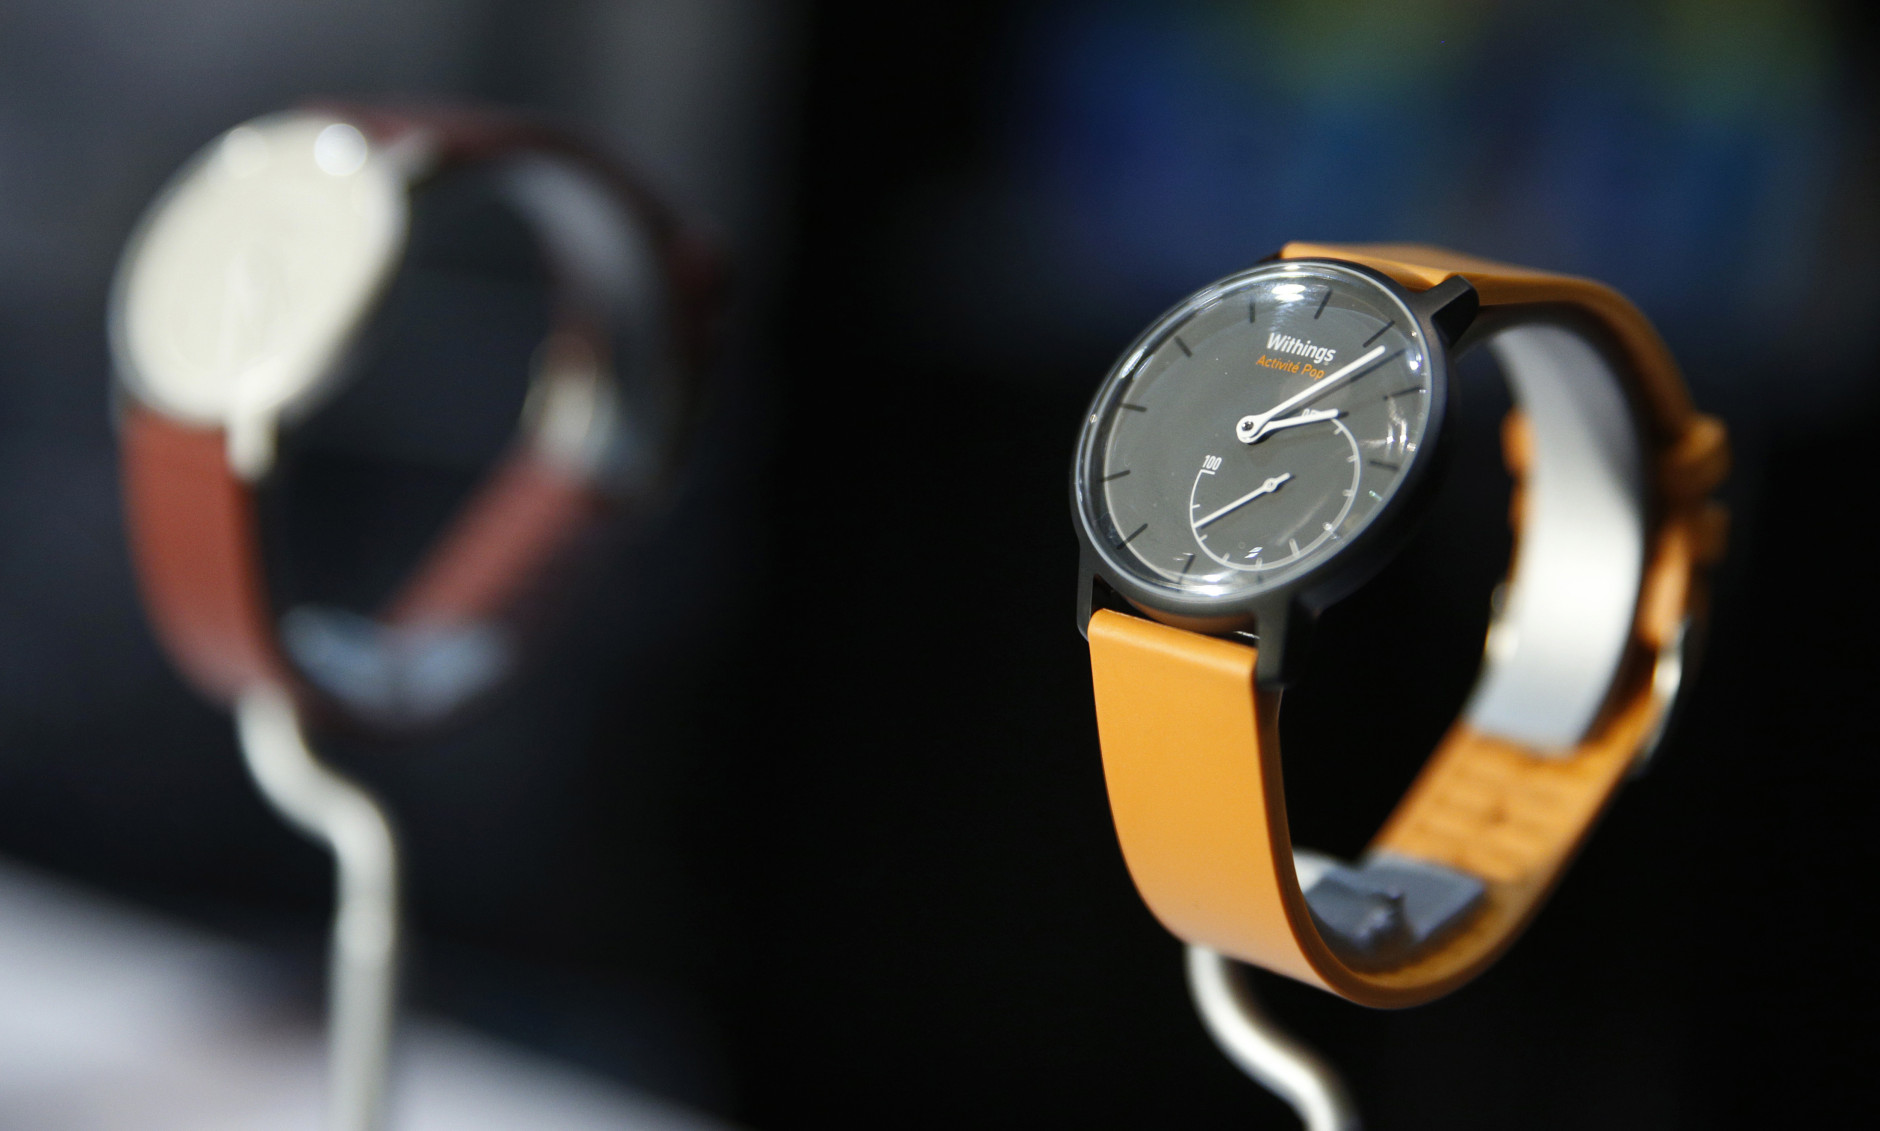 The Withings Activite Pop smart watch is on display at CES Unveiled, a media preview event for CES International, Sunday, Jan. 4, 2015, in Las Vegas. (AP Photo/John Locher)